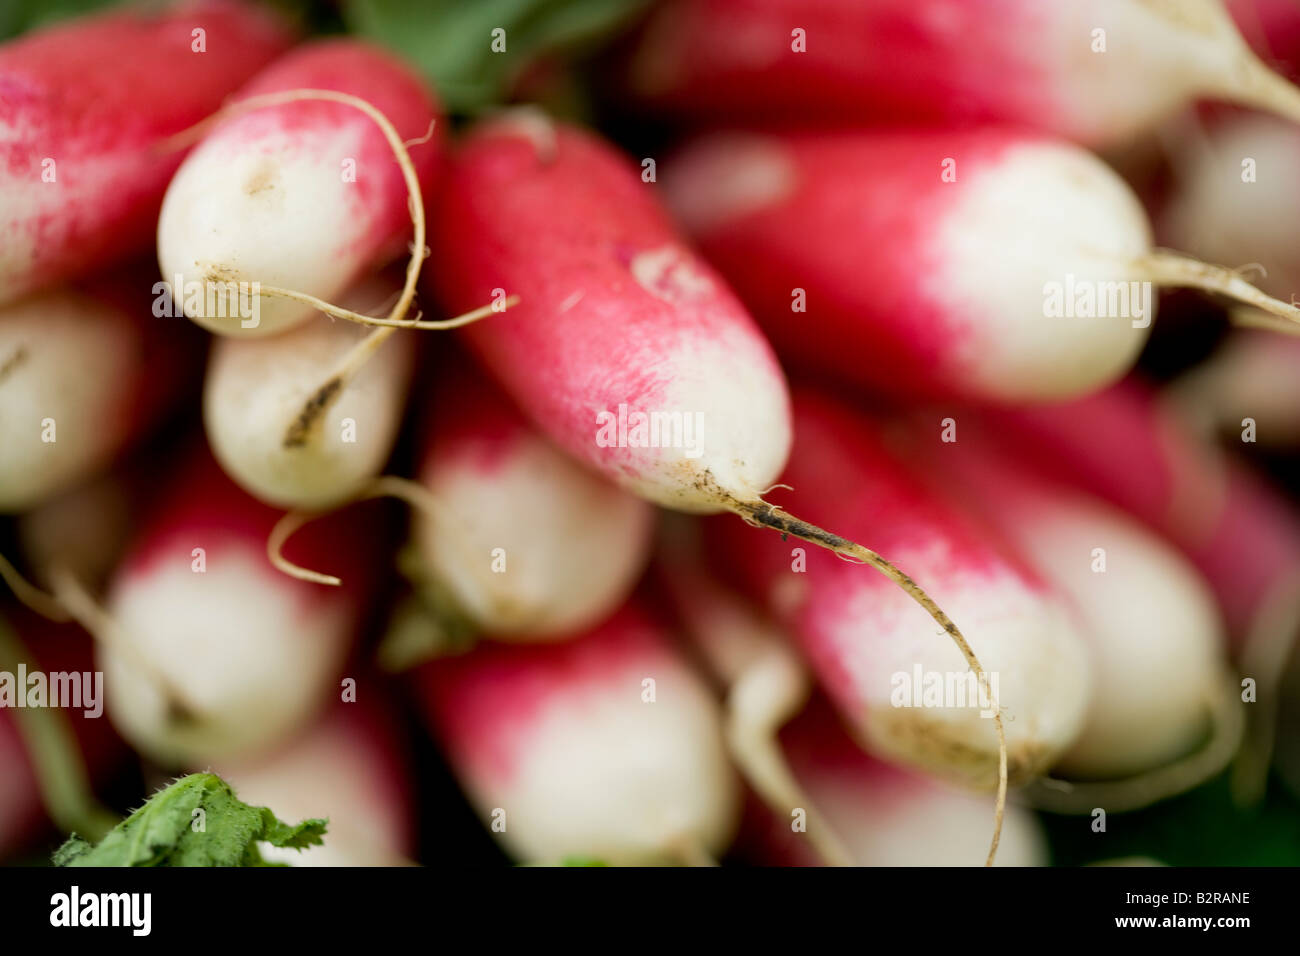 Radish, Vegetable, Isolated, Food, Groceries, Freshness, Red, Healthy Eating, Root, Green, Organic, Food And Drink, Isolated On Stock Photo